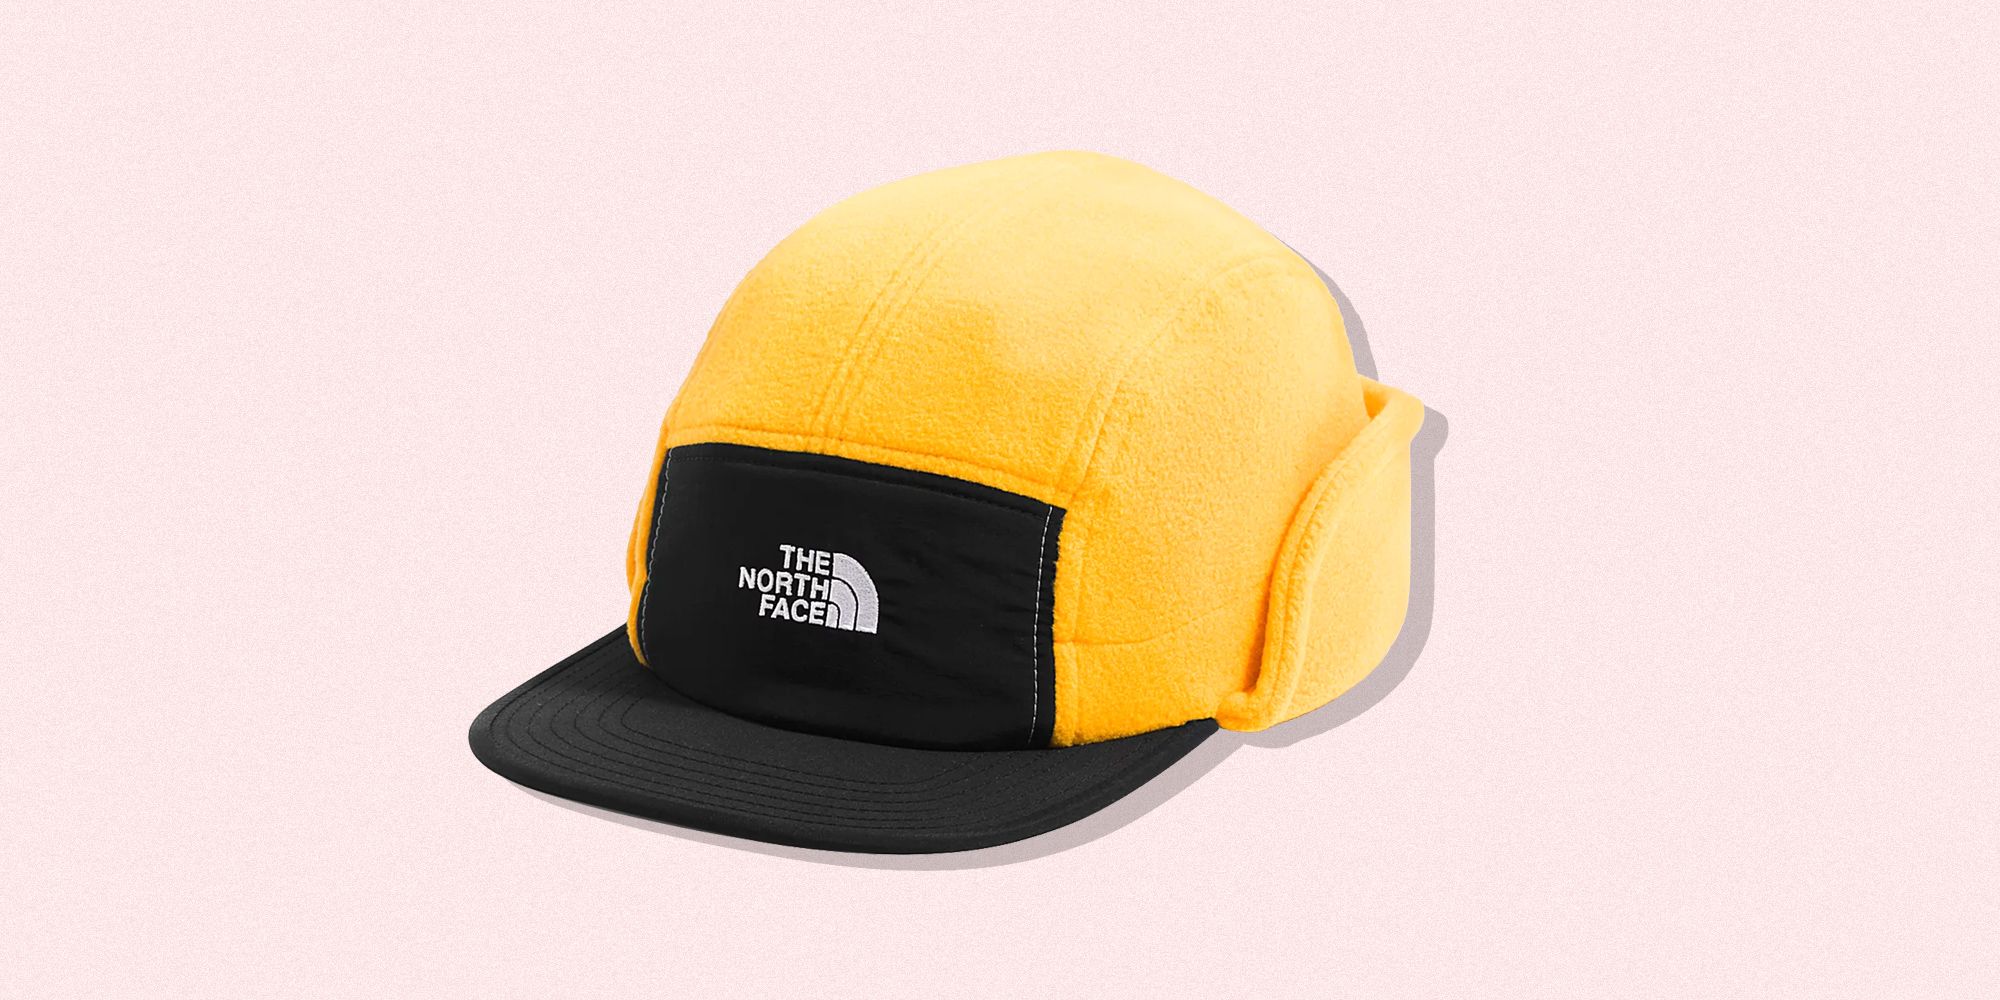 north face stocking hat